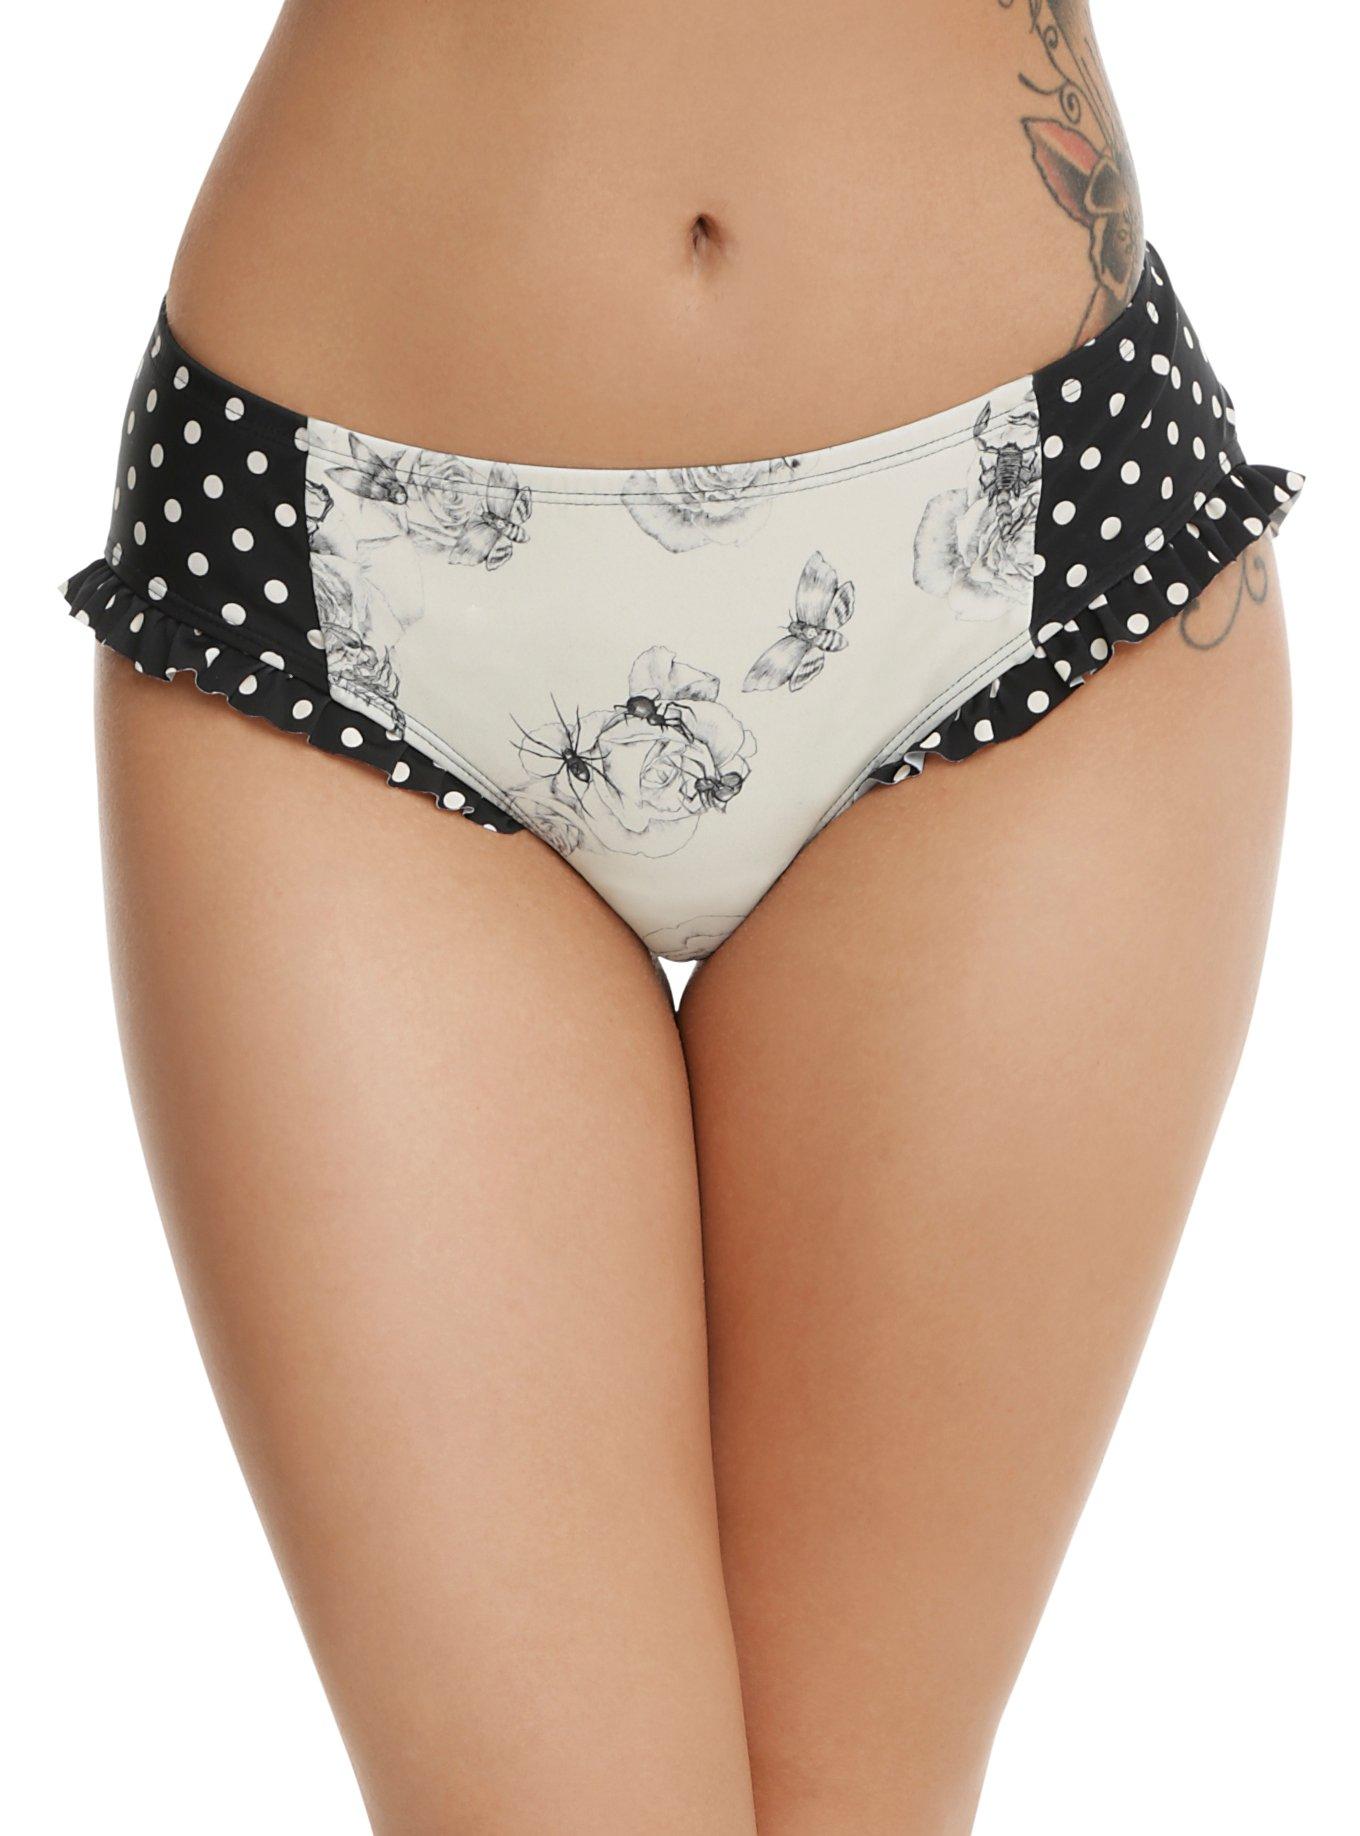 Polka Dots & Insects Swim Bottoms, WHITE, hi-res